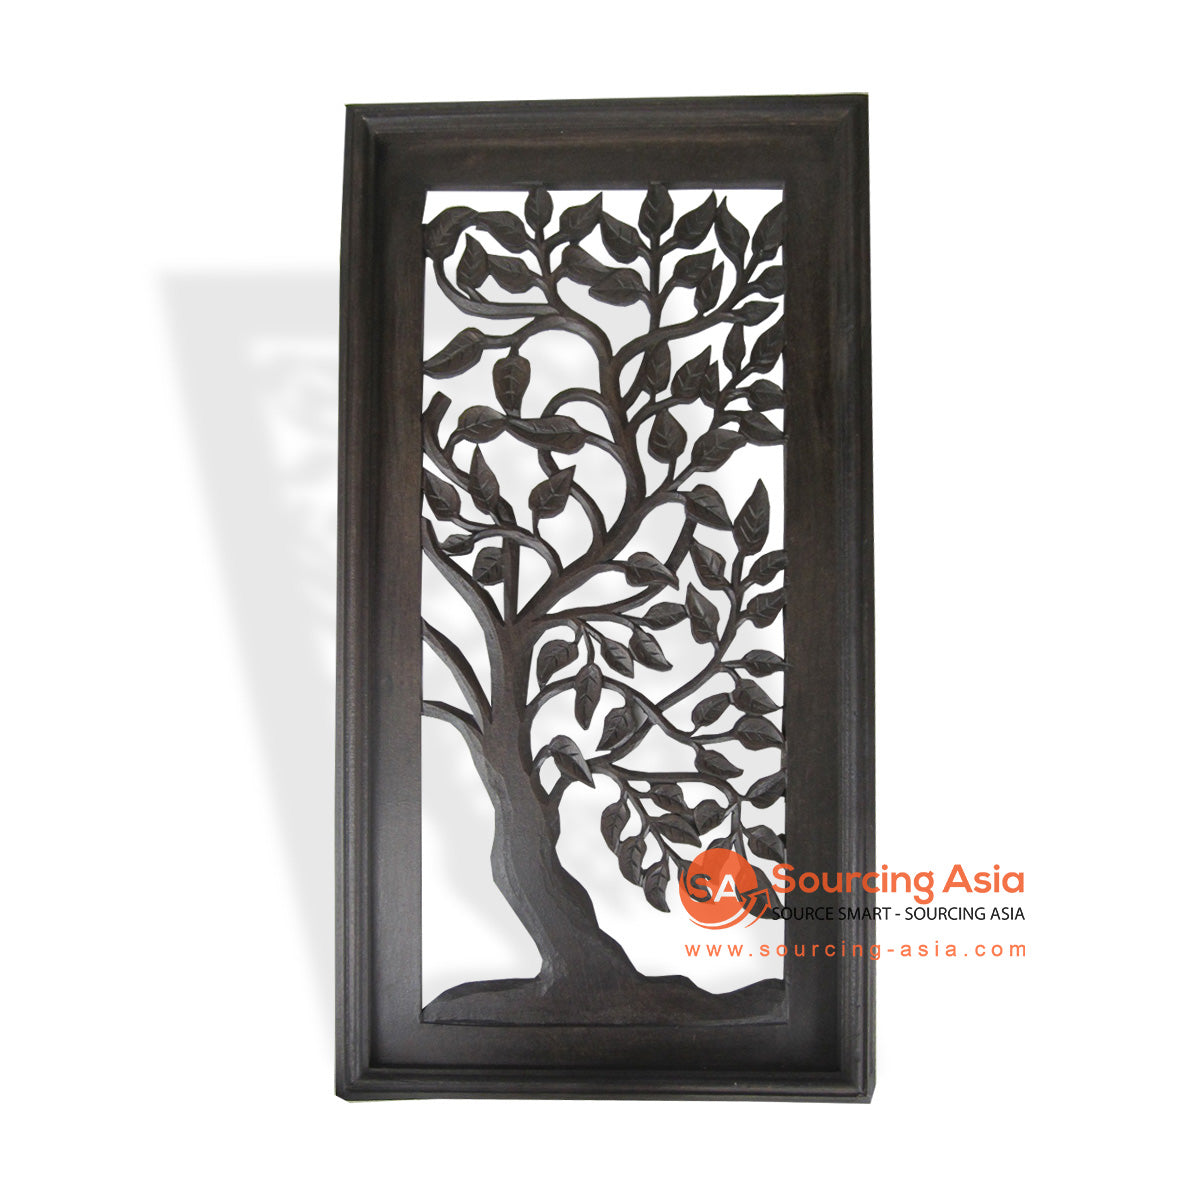 LUH024-1BR DARK BROWN WOODEN TREE CARVED PANEL